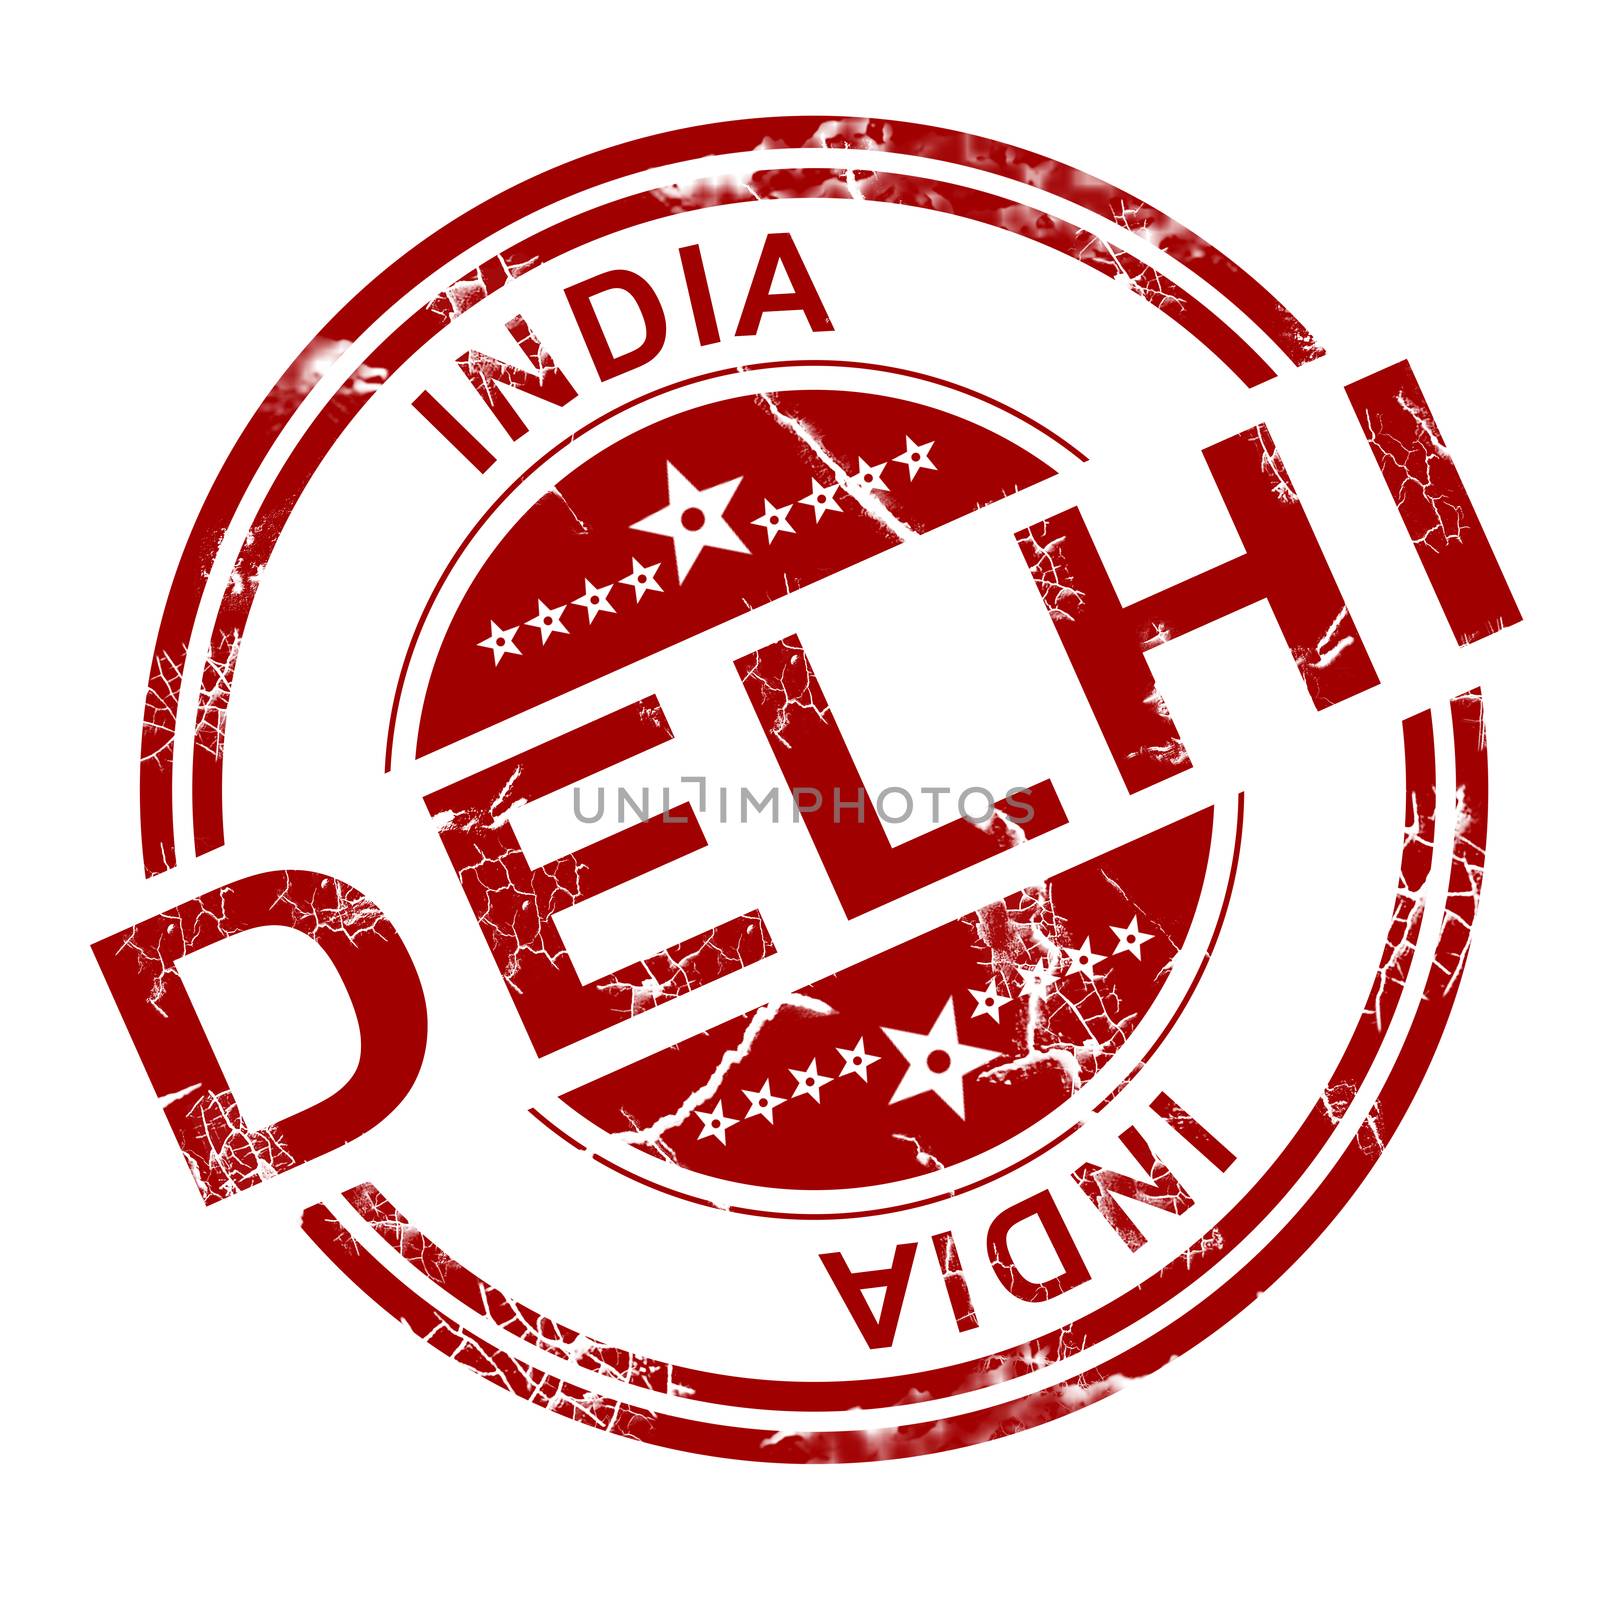 Red Delhi stamp by tang90246